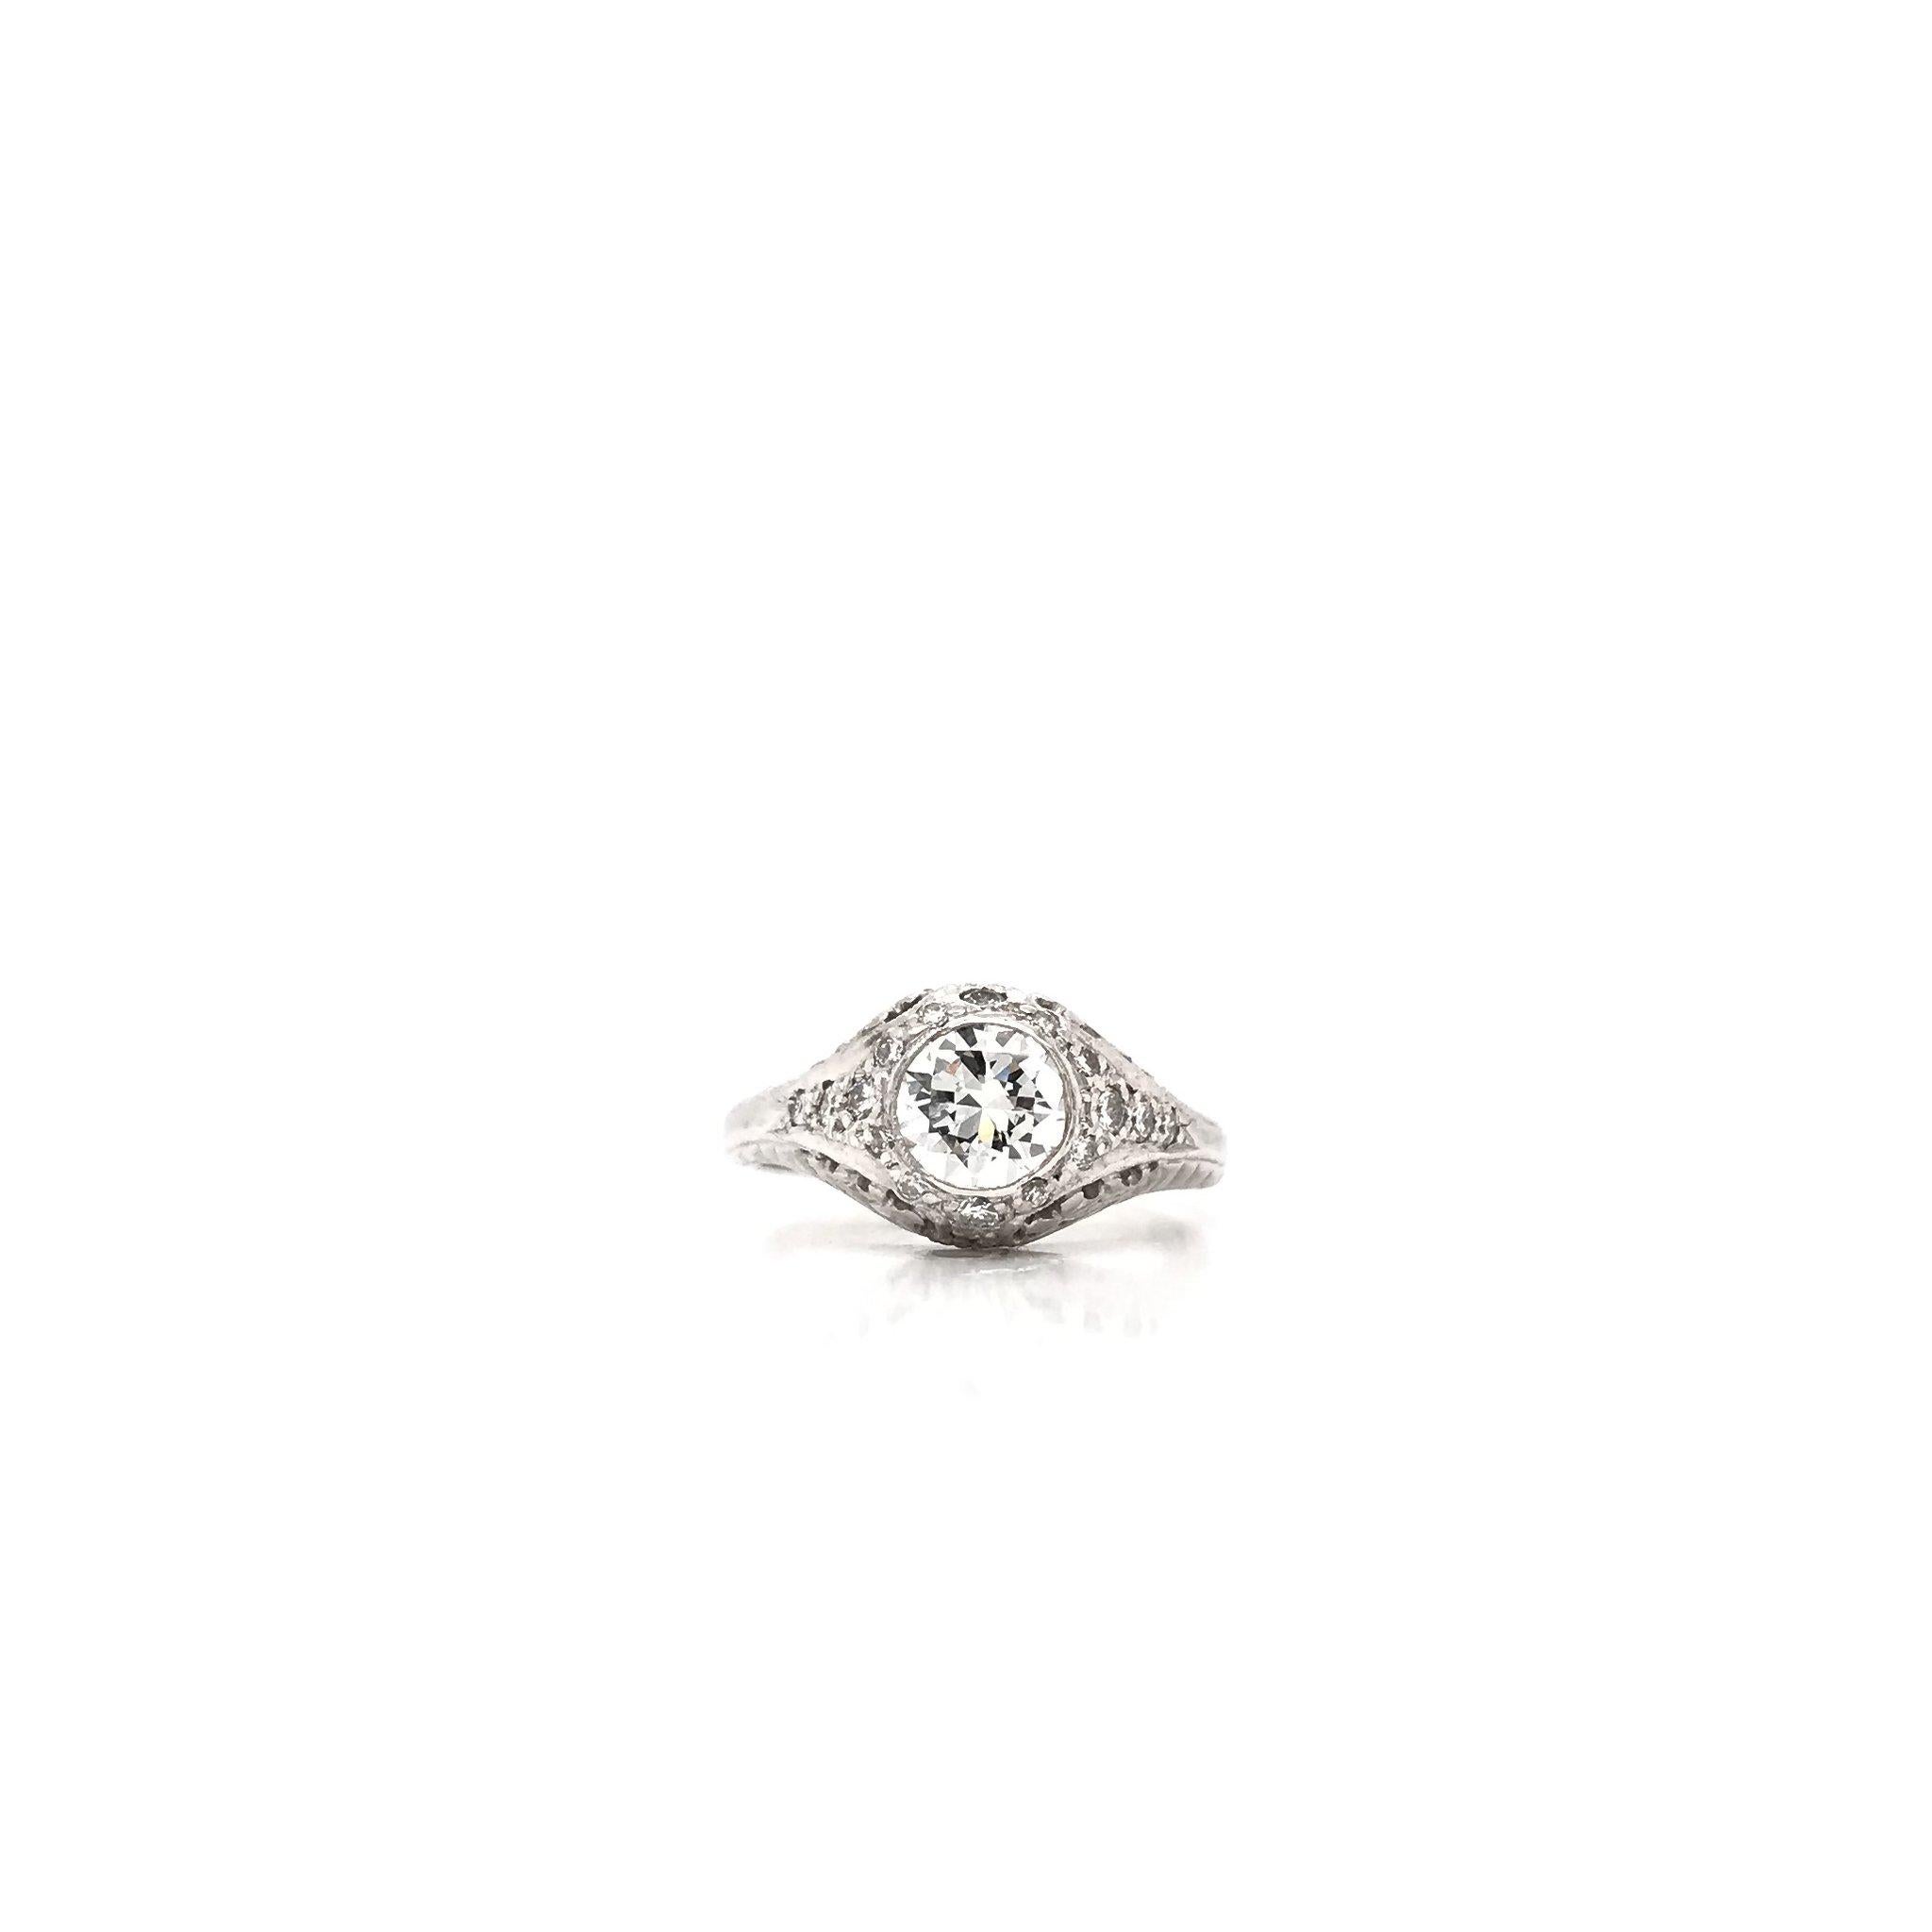 This antique piece was handcrafted sometime during the Art Deco design period ( 1920-1940 ). The setting is platinum and features a 0.75 carat center diamond. The center diamond is an old european cut, grades approximately J in color, and VS1 in